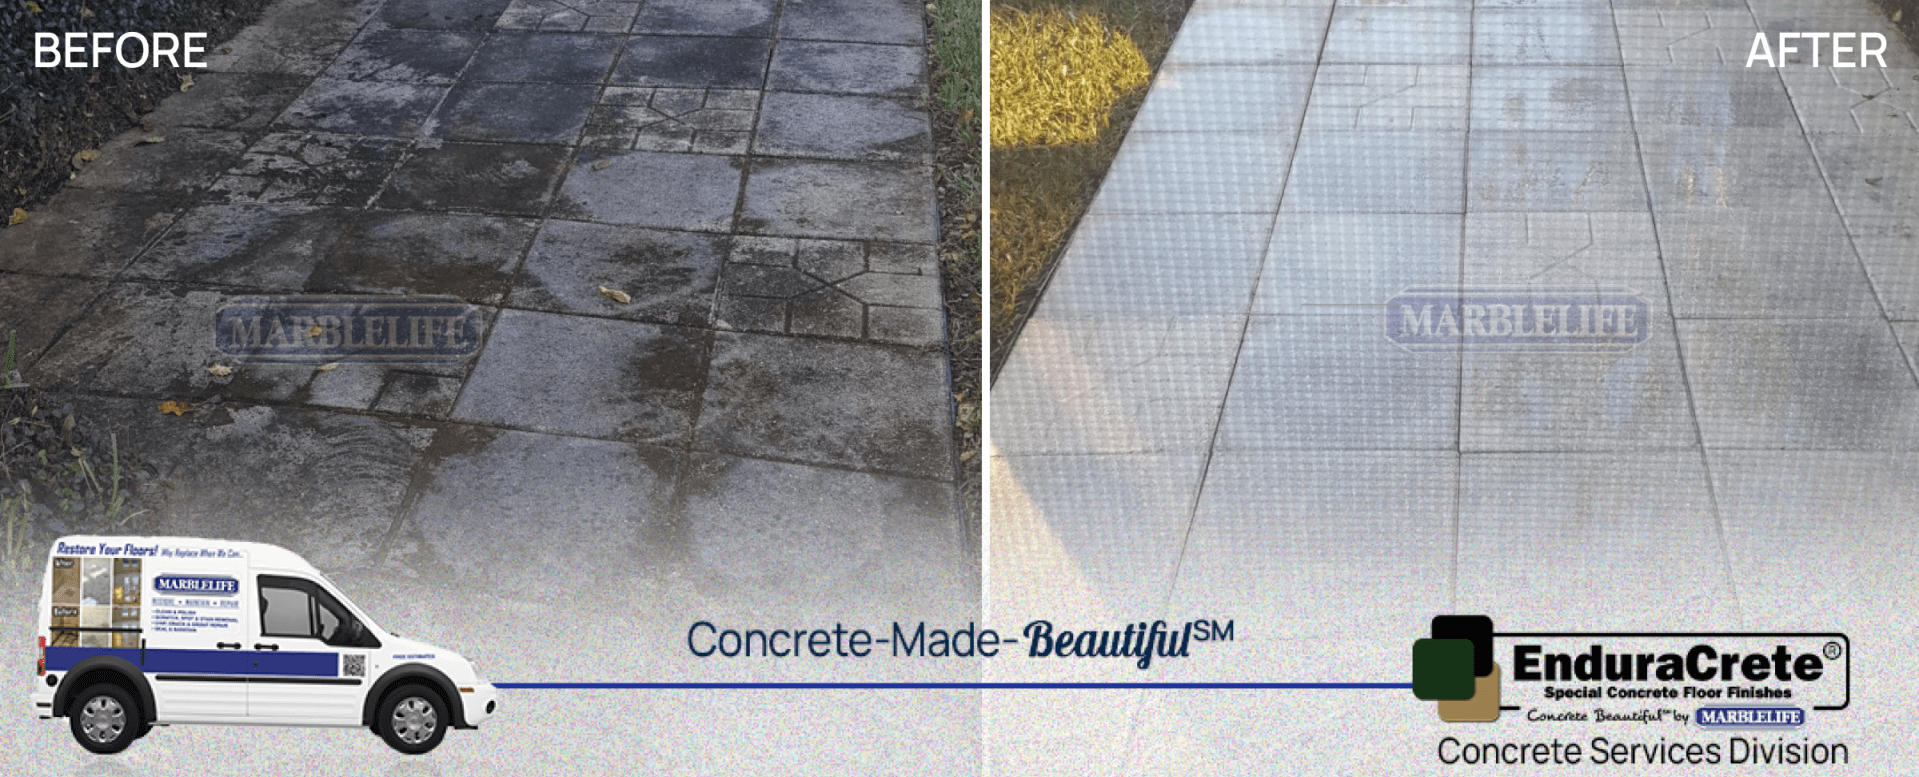 Mold & Mildew Removed by MARBLELIFE's Concrete Services Division